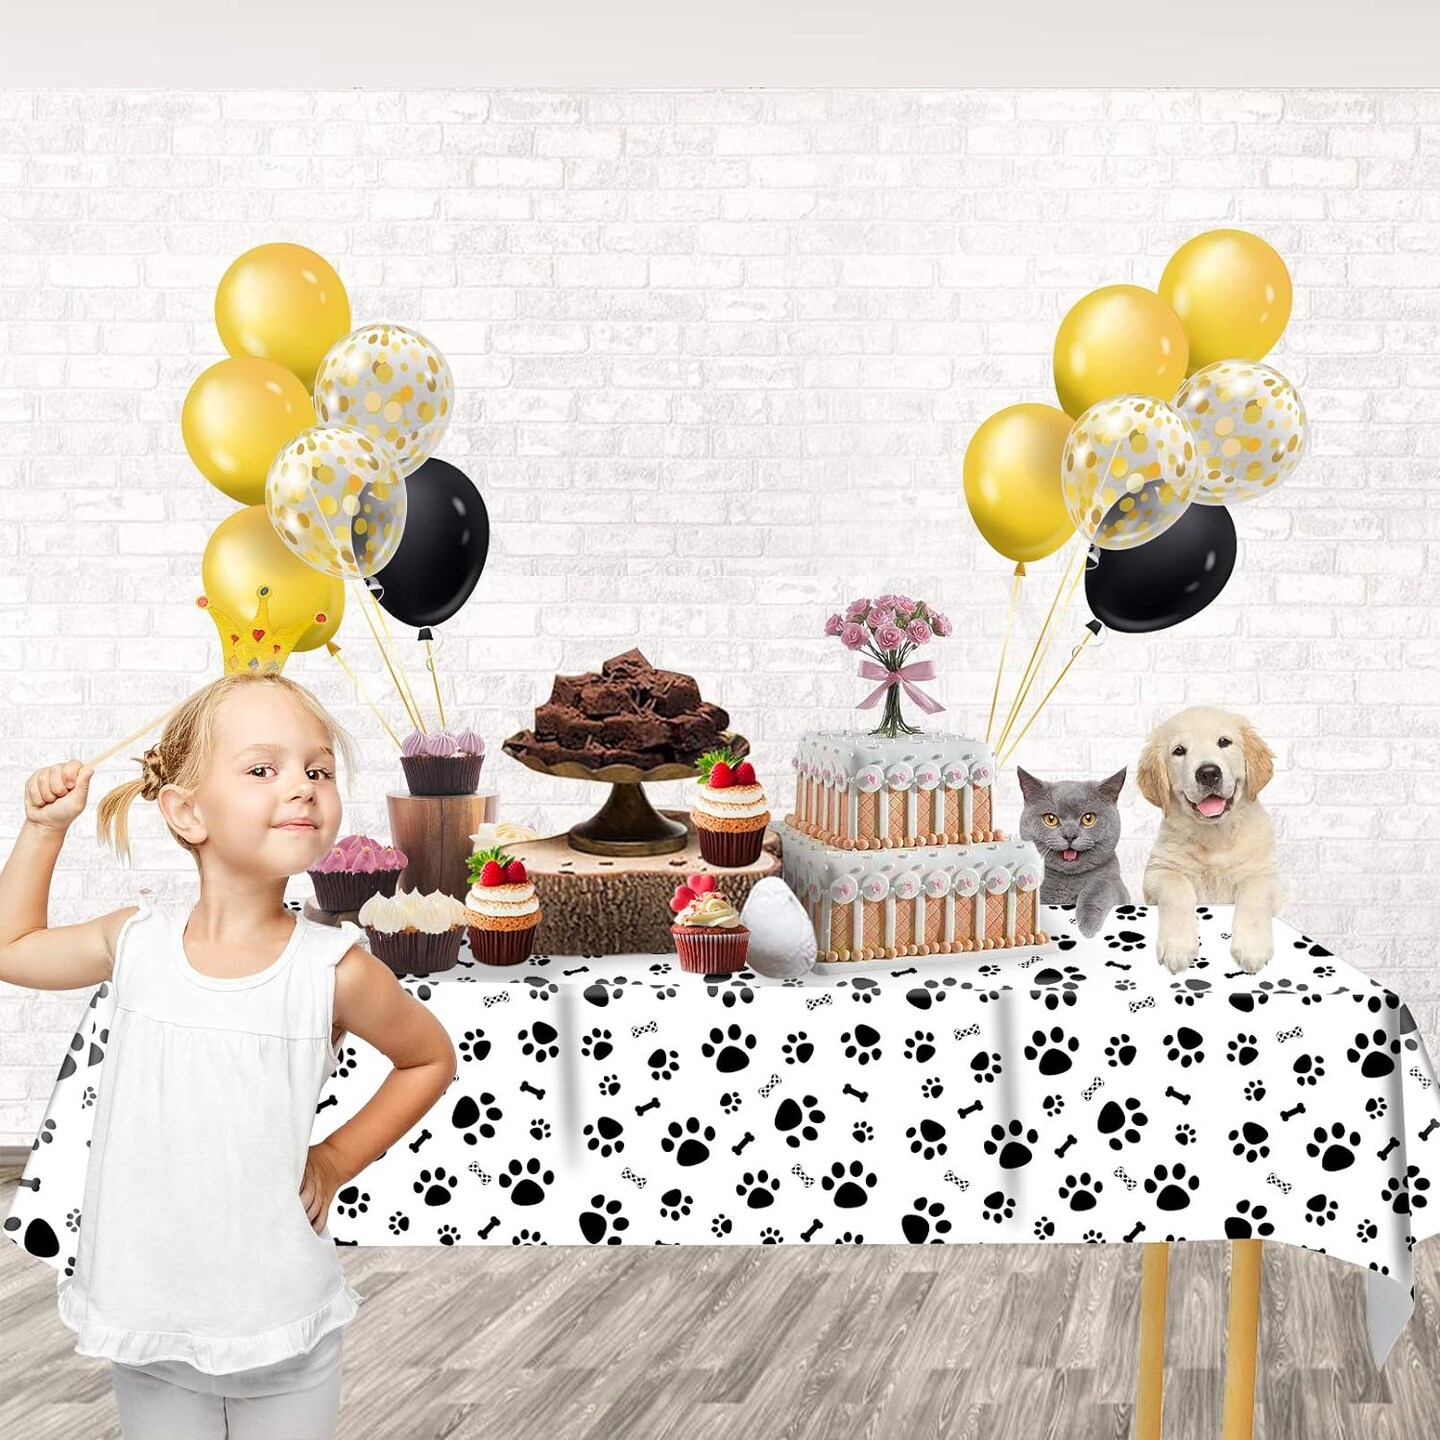 3 Pack Puppy Dog Pet Paw Print Plastic Tablecloth Table Cover,Large Paw Print and Bone Sign Plastic Disposable Rectangle Table Cover for Pet Dog Themed Birthday Party Decorations,54x108 inch